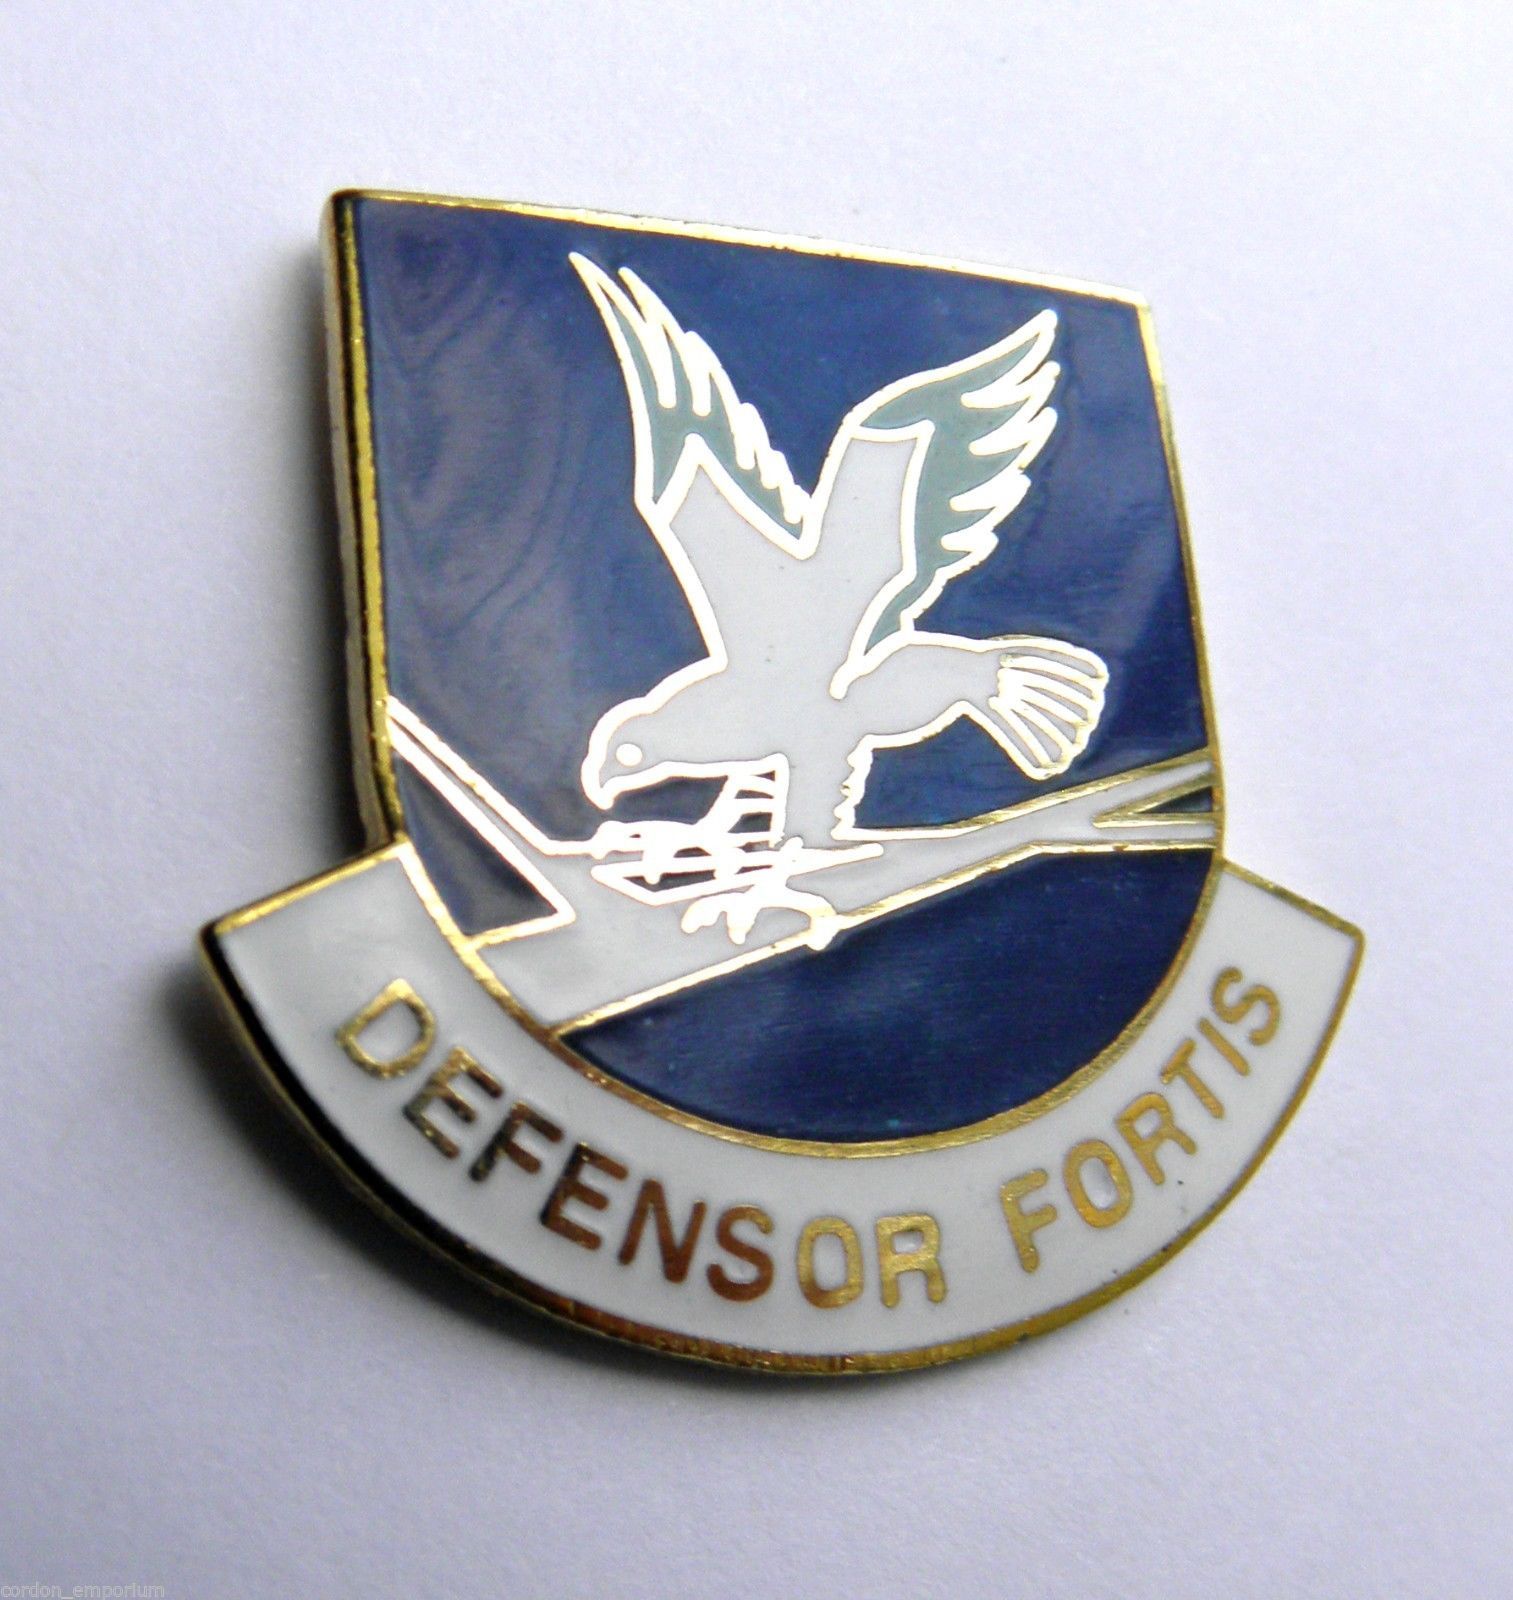 USAF US AIR FORCE SECURITY FORCES DEFENSOR FORTIS LAPEL PIN BADGE 1 INCH - $4.84